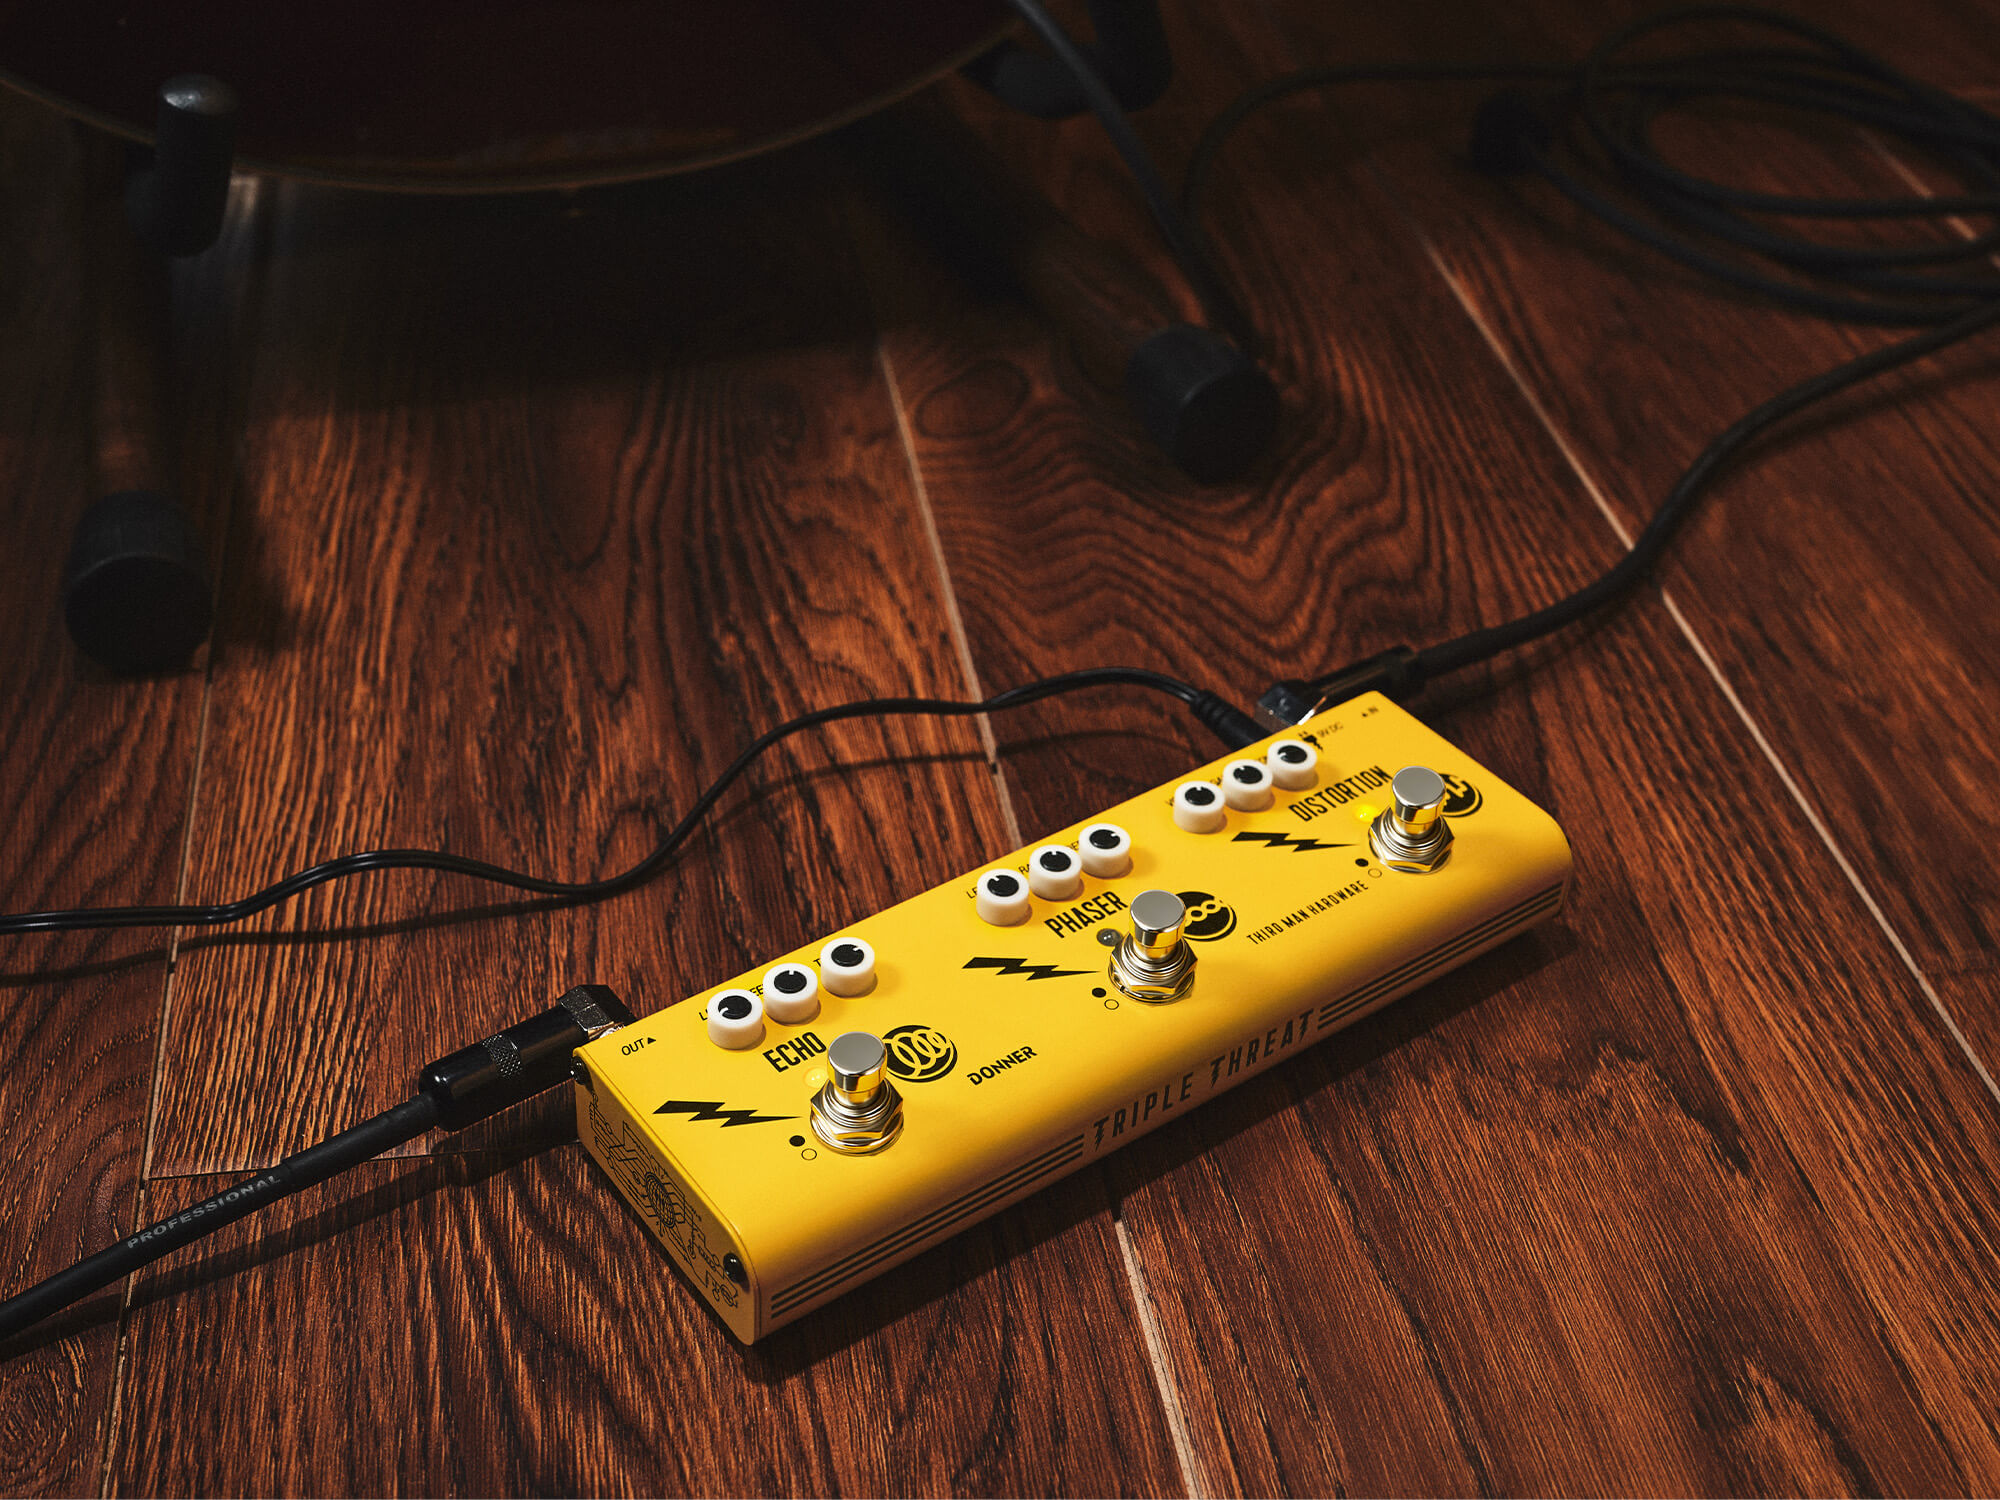 Donner x Third Man Hardware's Triple Threat. The image shows the limited edition Yellow version. It has three main switches, each with three smaller controls. It is plugged in and sits on a wooden floor.